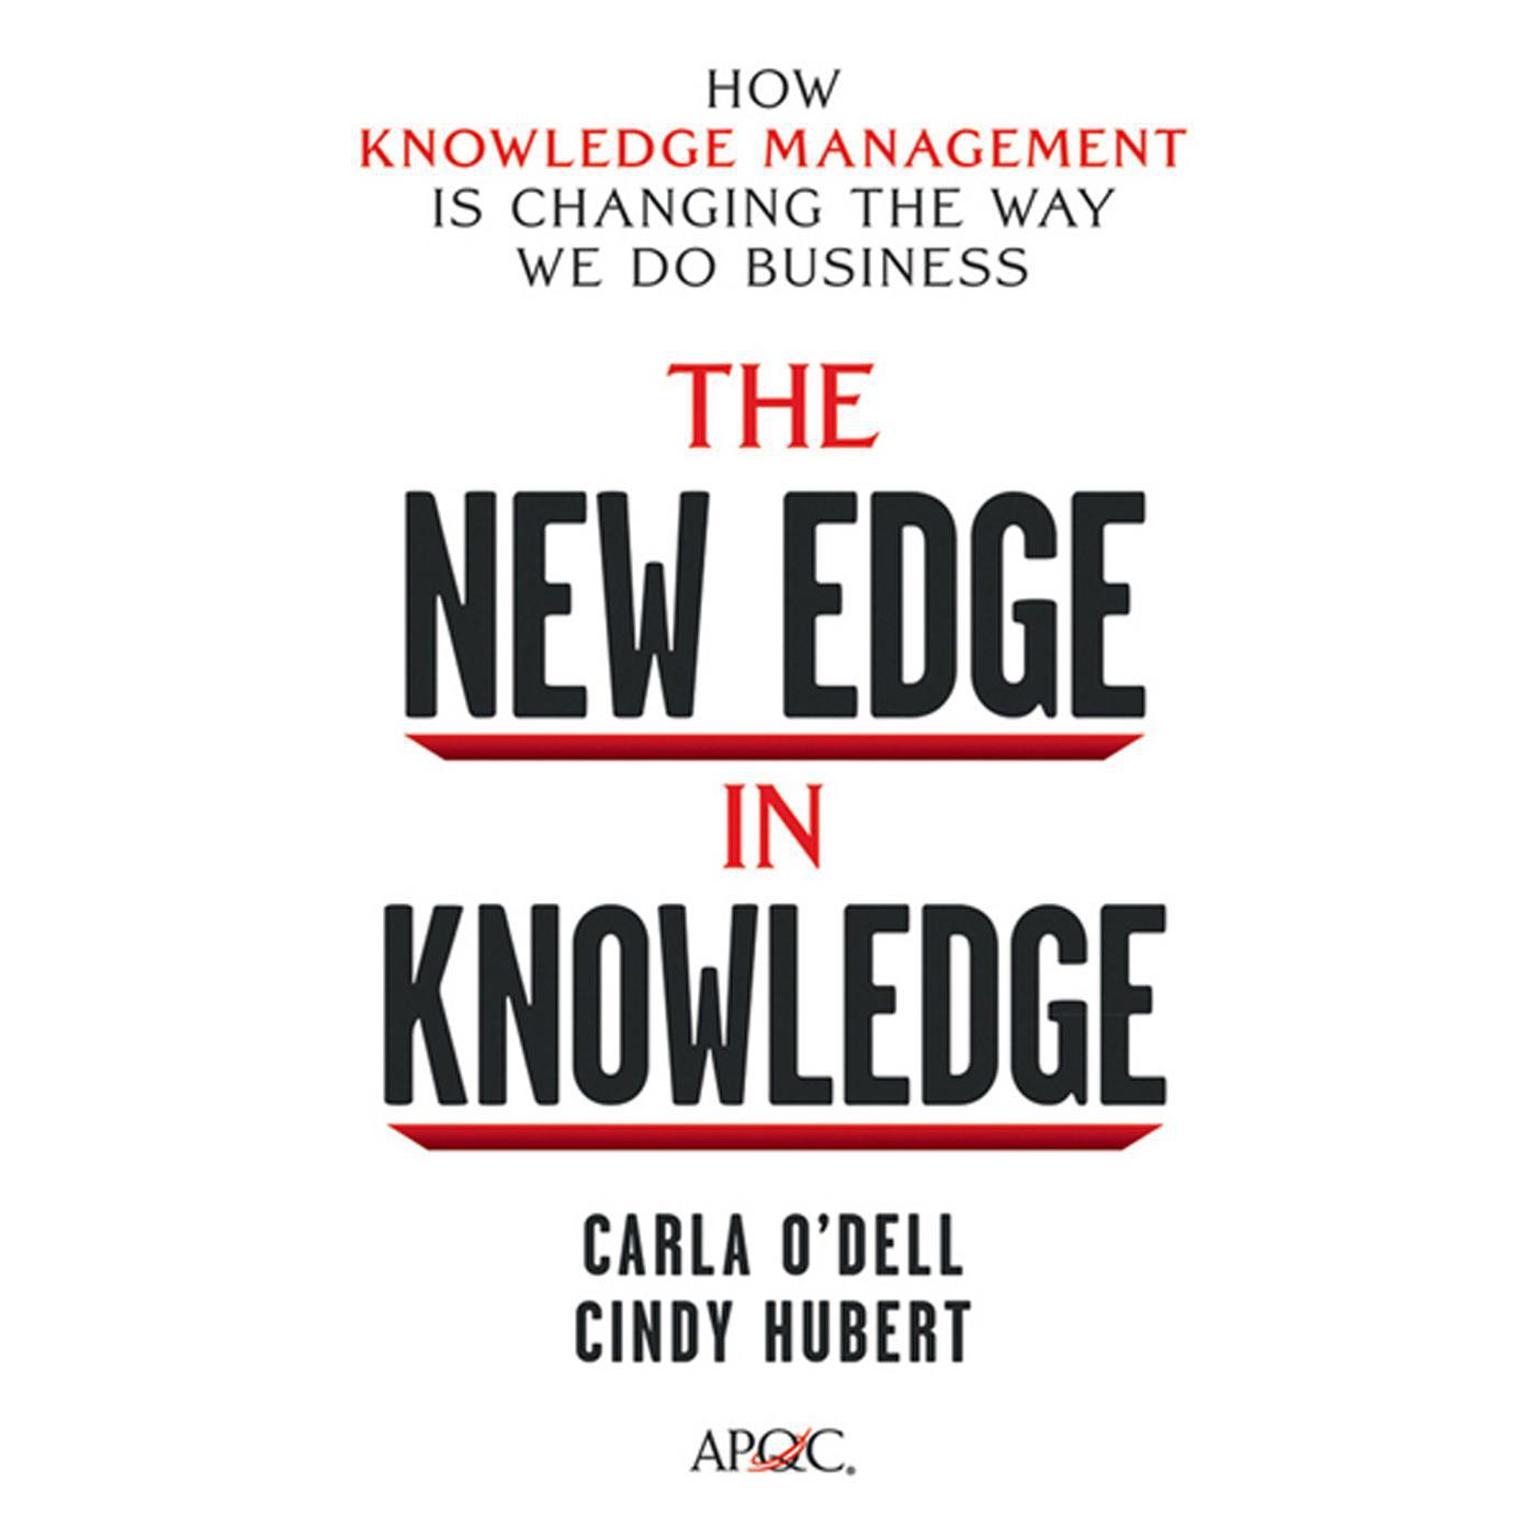 The New Edge in Knowledge: How Knowledge Management is Changing the Way We Do Business Audiobook, by Carla O'Dell